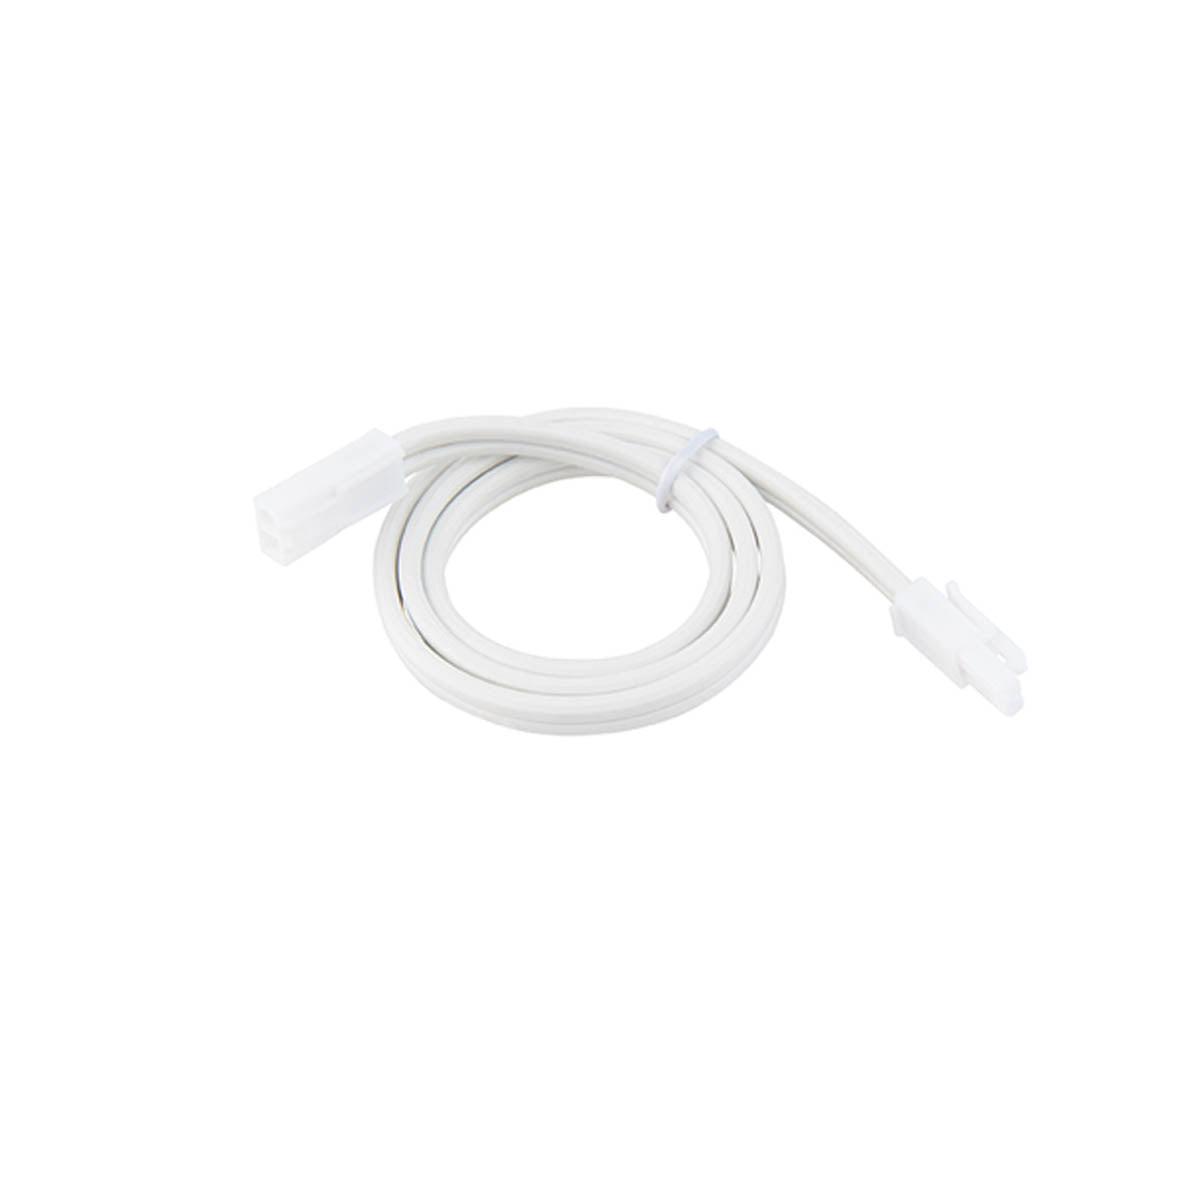 36in. Interconnect Cable for 3-CCT Puck Light, White - Bees Lighting